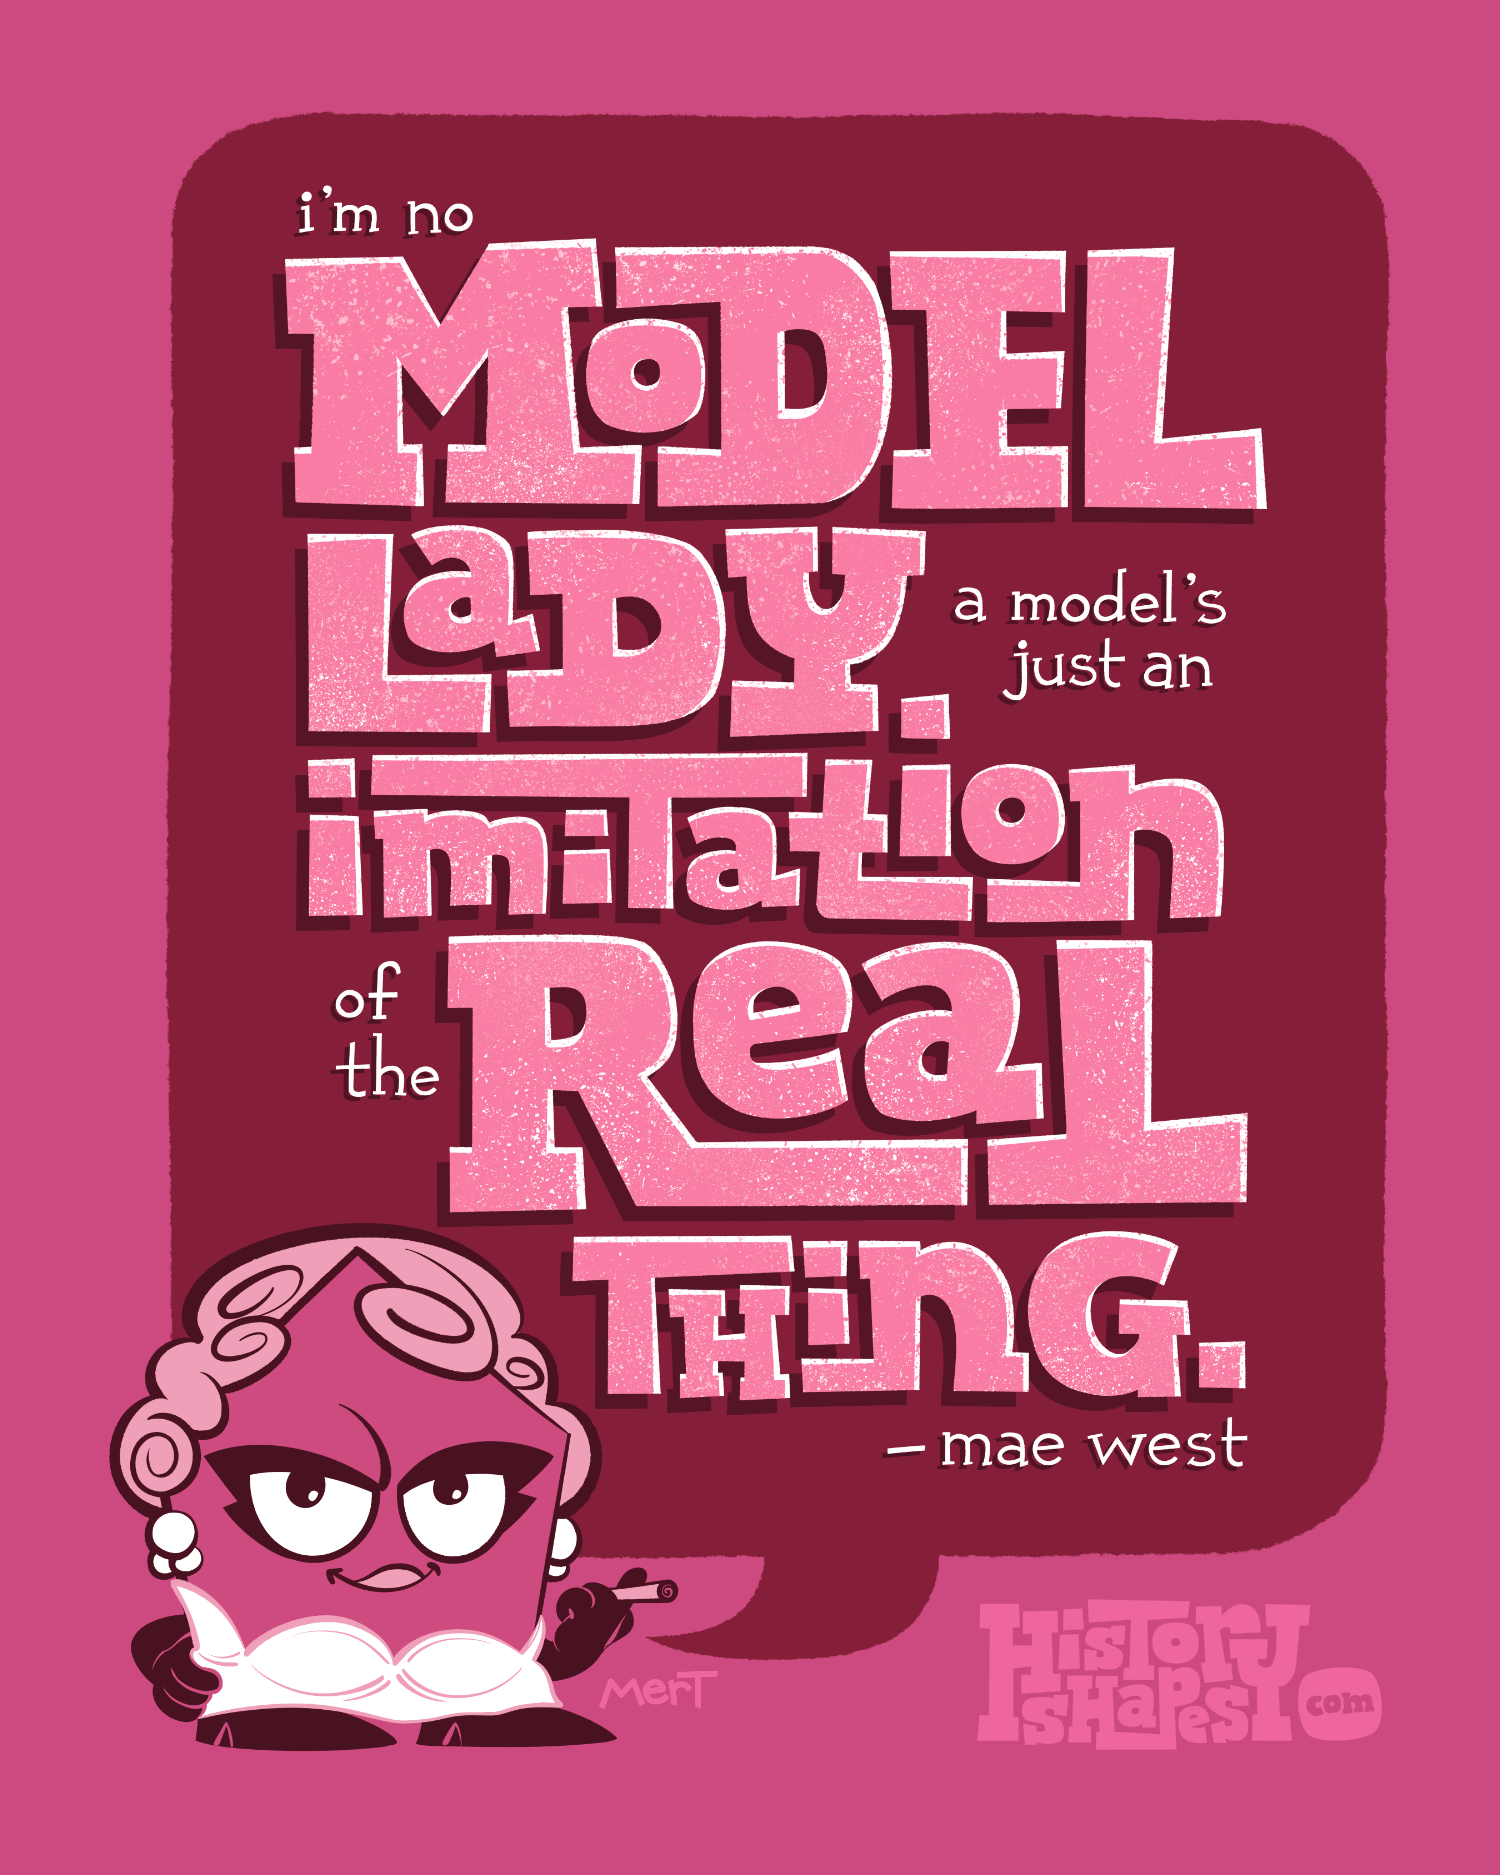 Mel, a sassy pink pentagon, is dressed as Mae West with the quote "I'm no model lady. A model's just an imitation of the real thing."